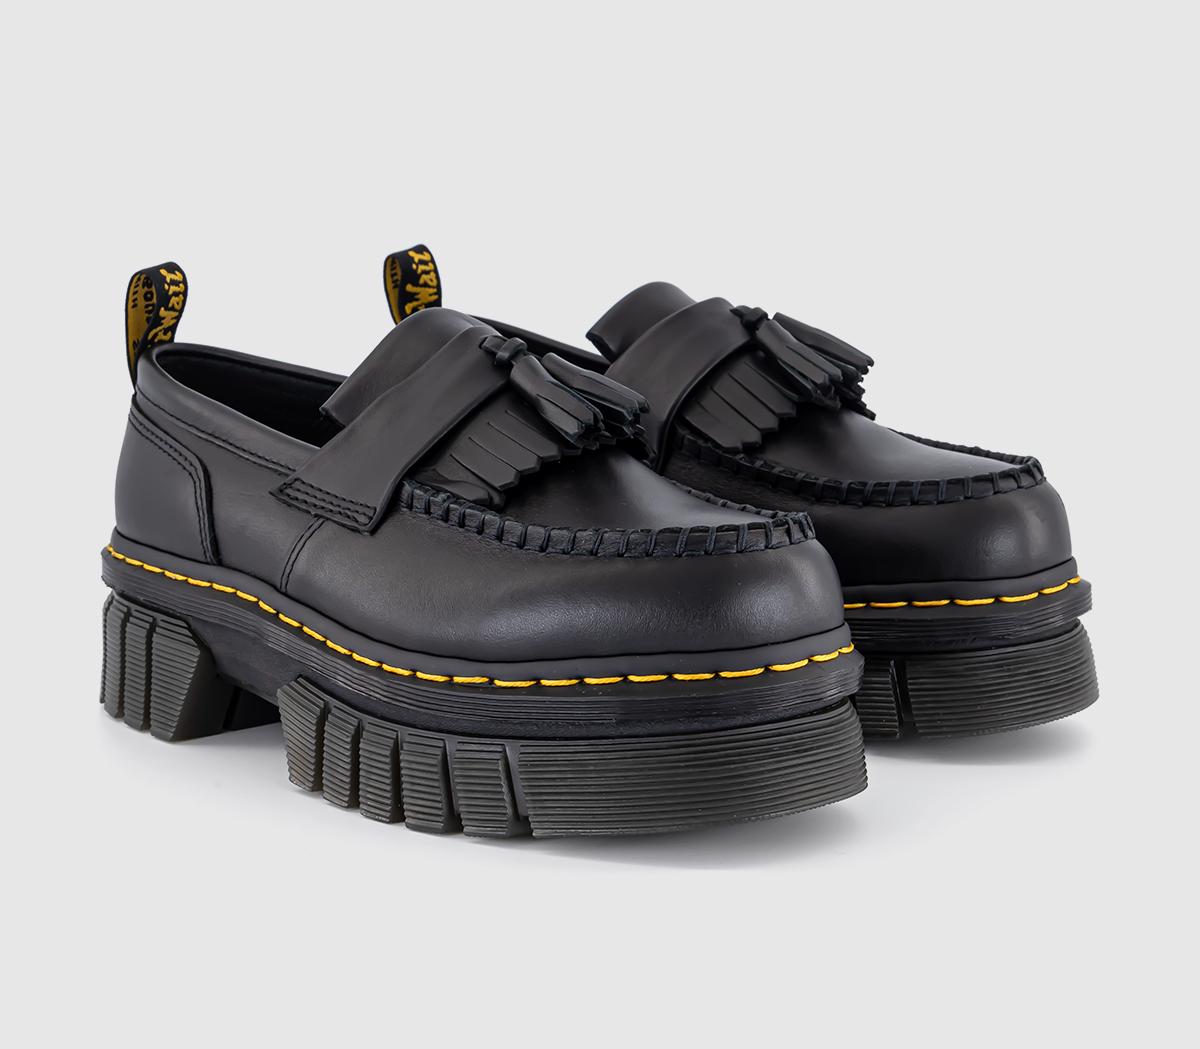 Dr. Martens Womens Adrian Audrick Loafers Black, 6